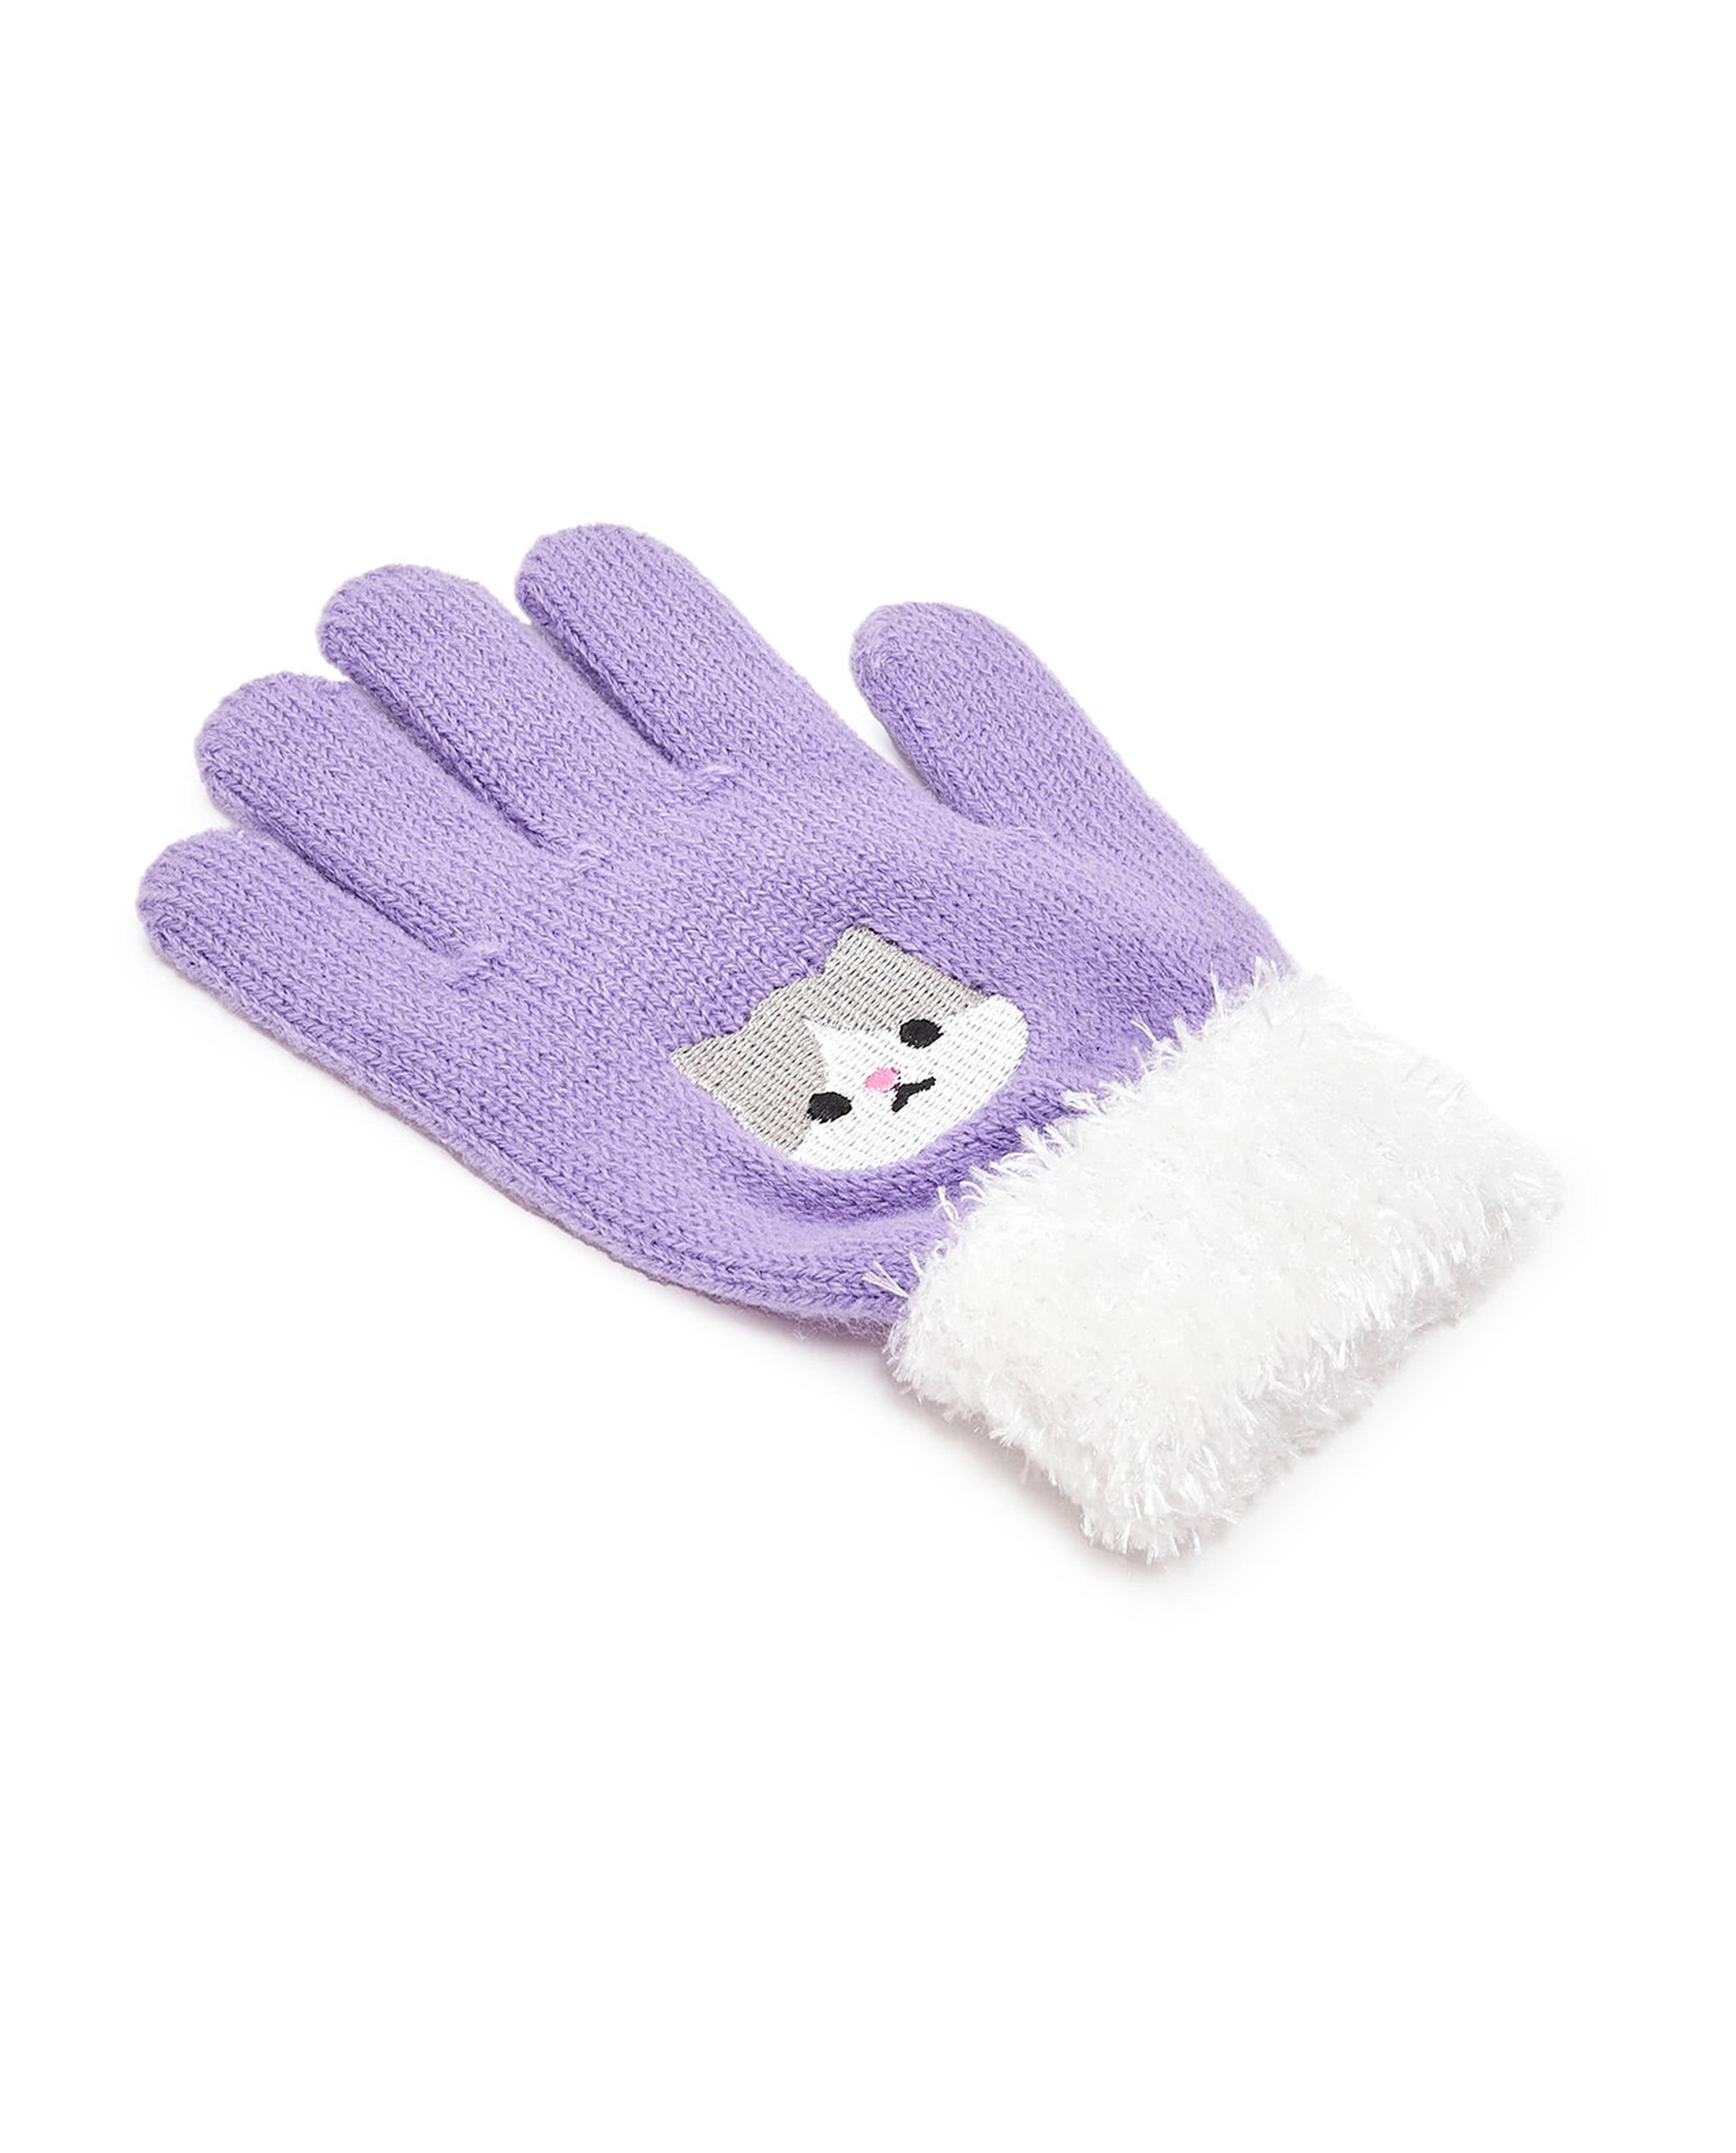 Embroidered Knit Gloves